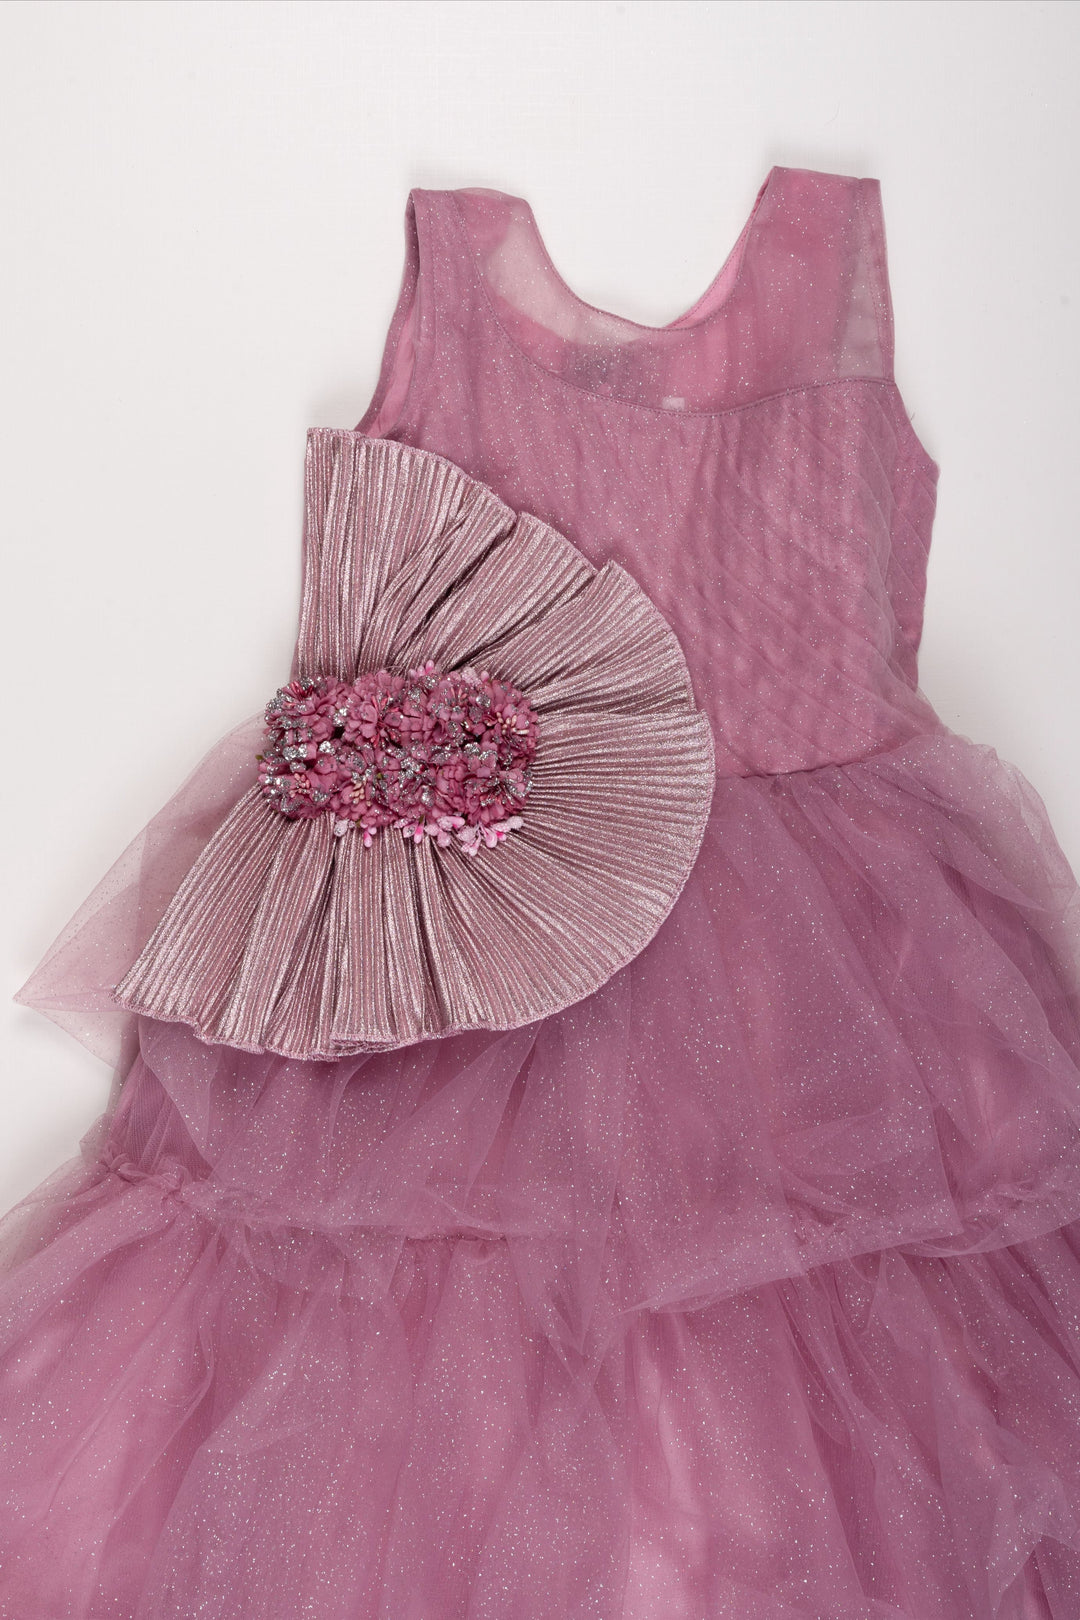 The Nesavu Girls Party Gown Enchanted Pink Tulle Princess Dress with Floral Accents for Girls Nesavu Girls Pink Tulle Dress | Floral Princess Gown | Special Occasion Elegance | The Nesavu